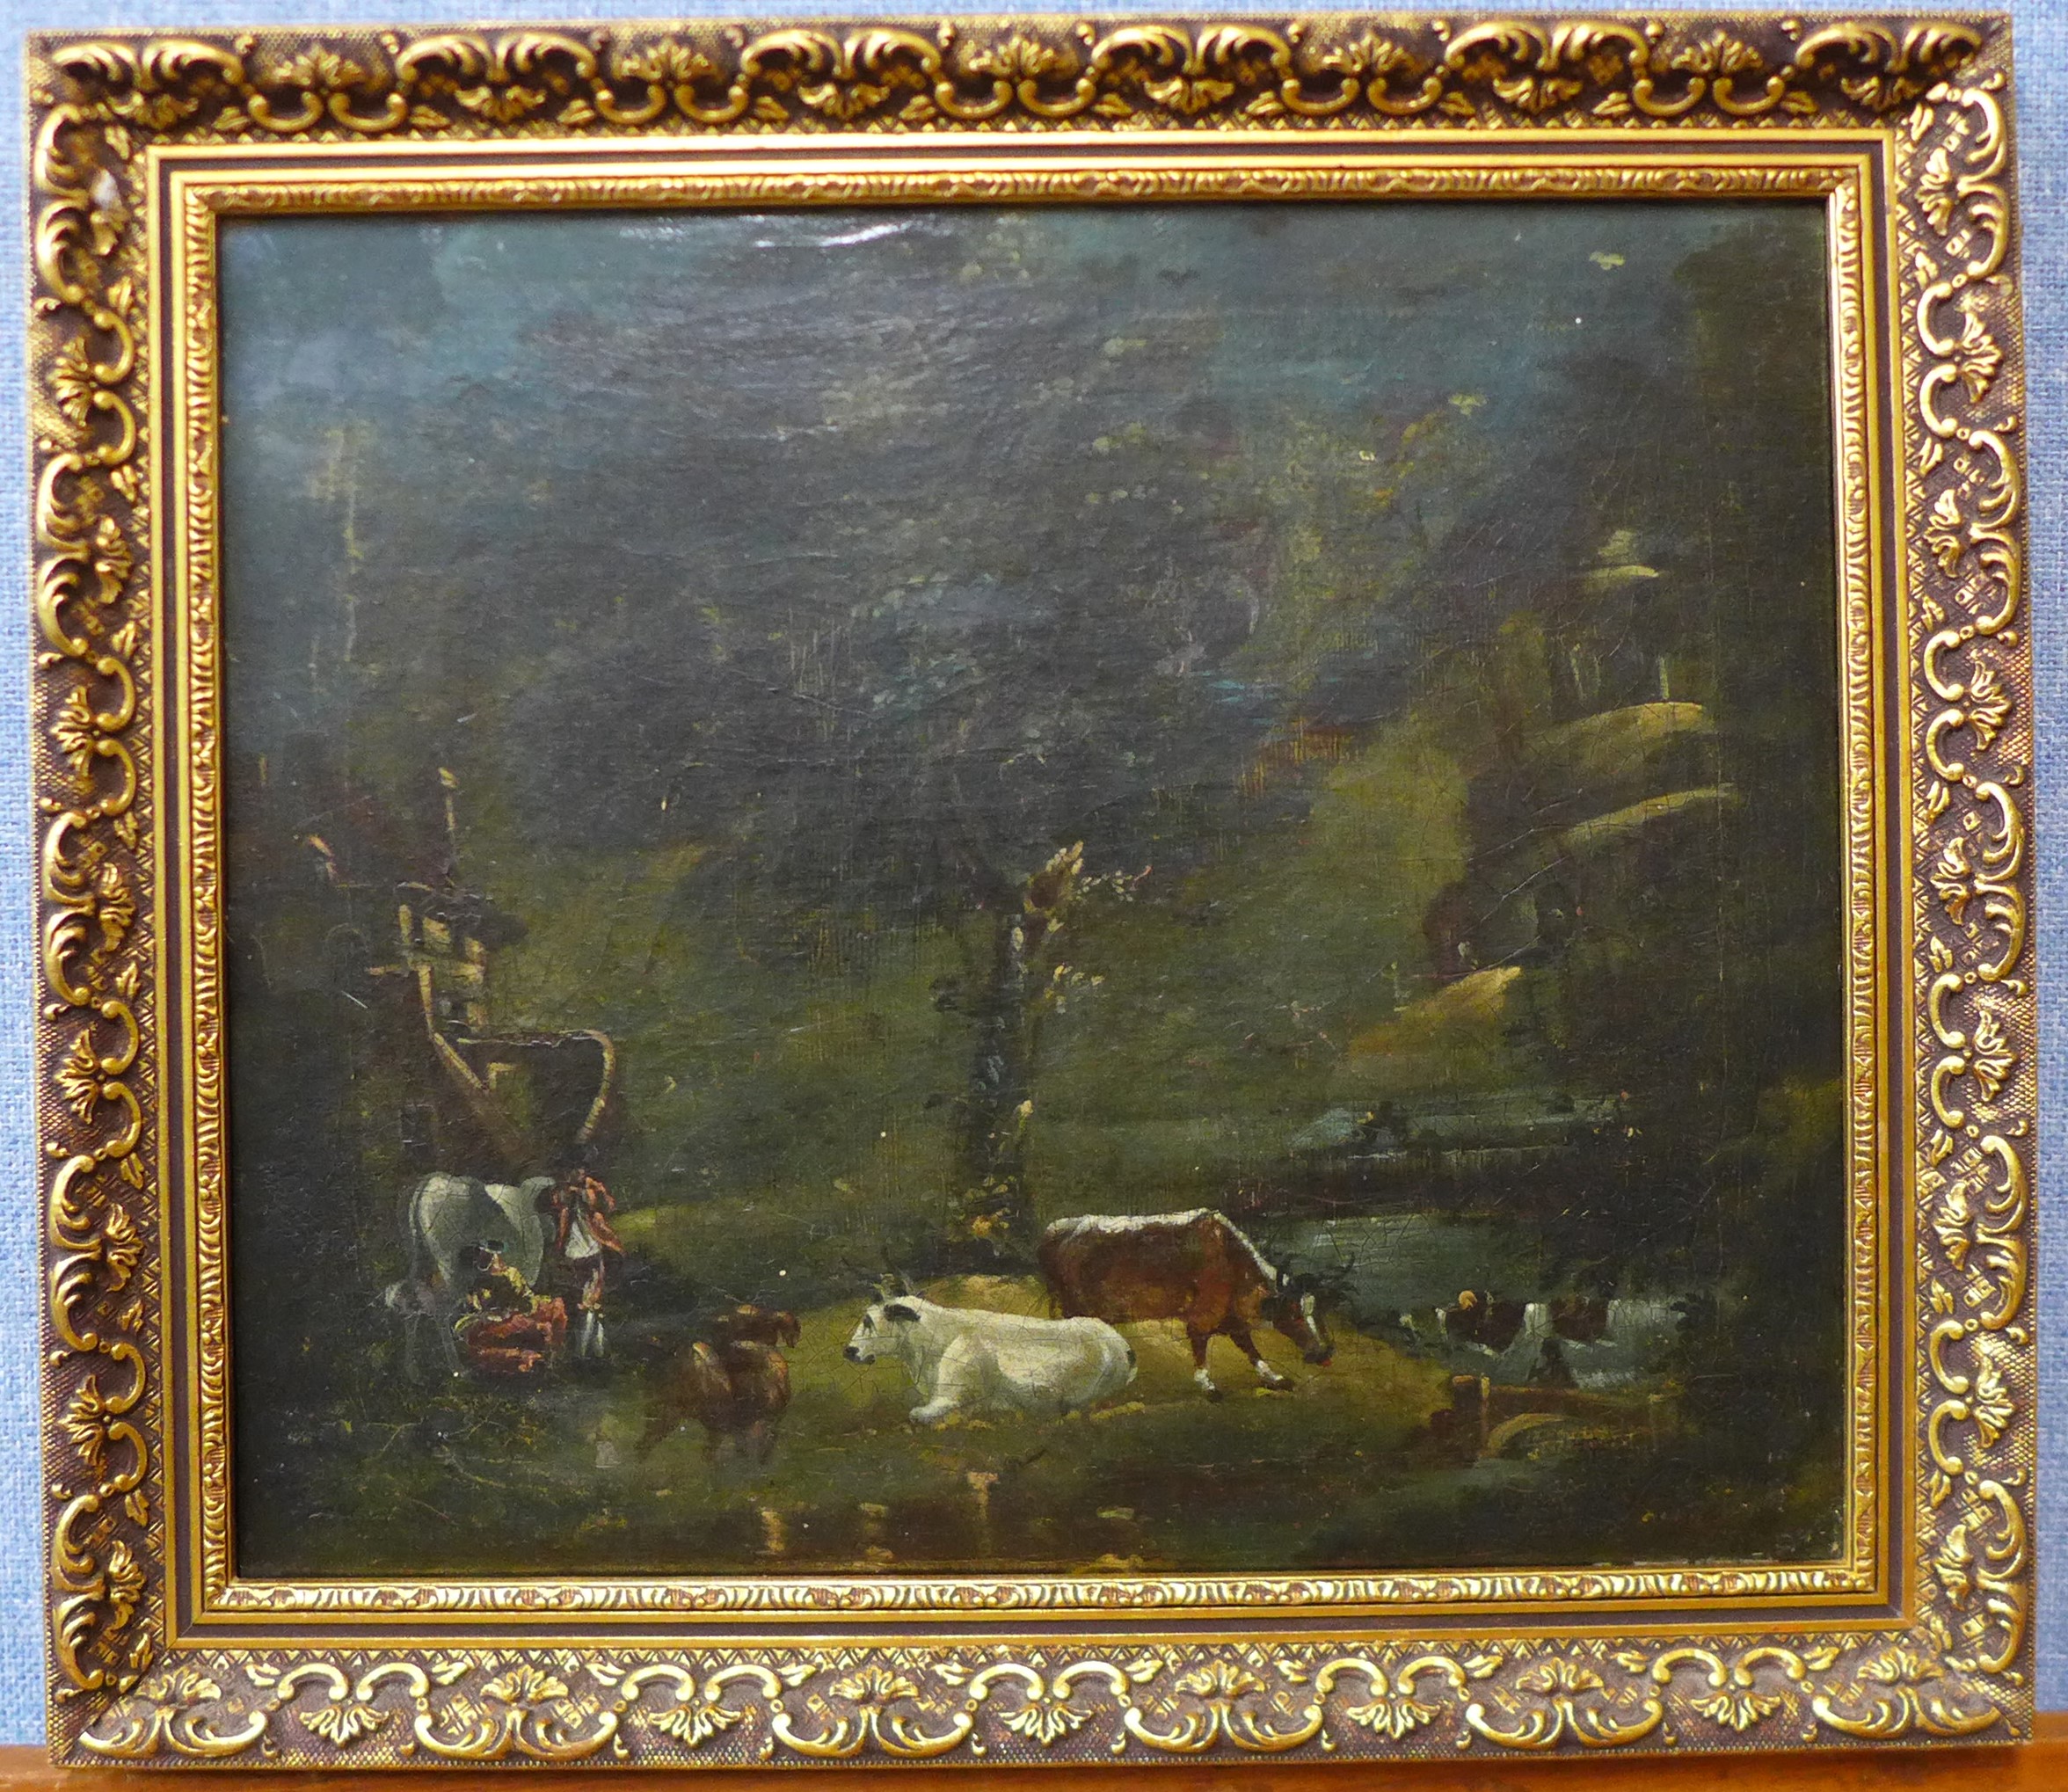 Italian School (mid 18th Century), landscape with figures and cattle by a river (fragment of a - Image 2 of 2